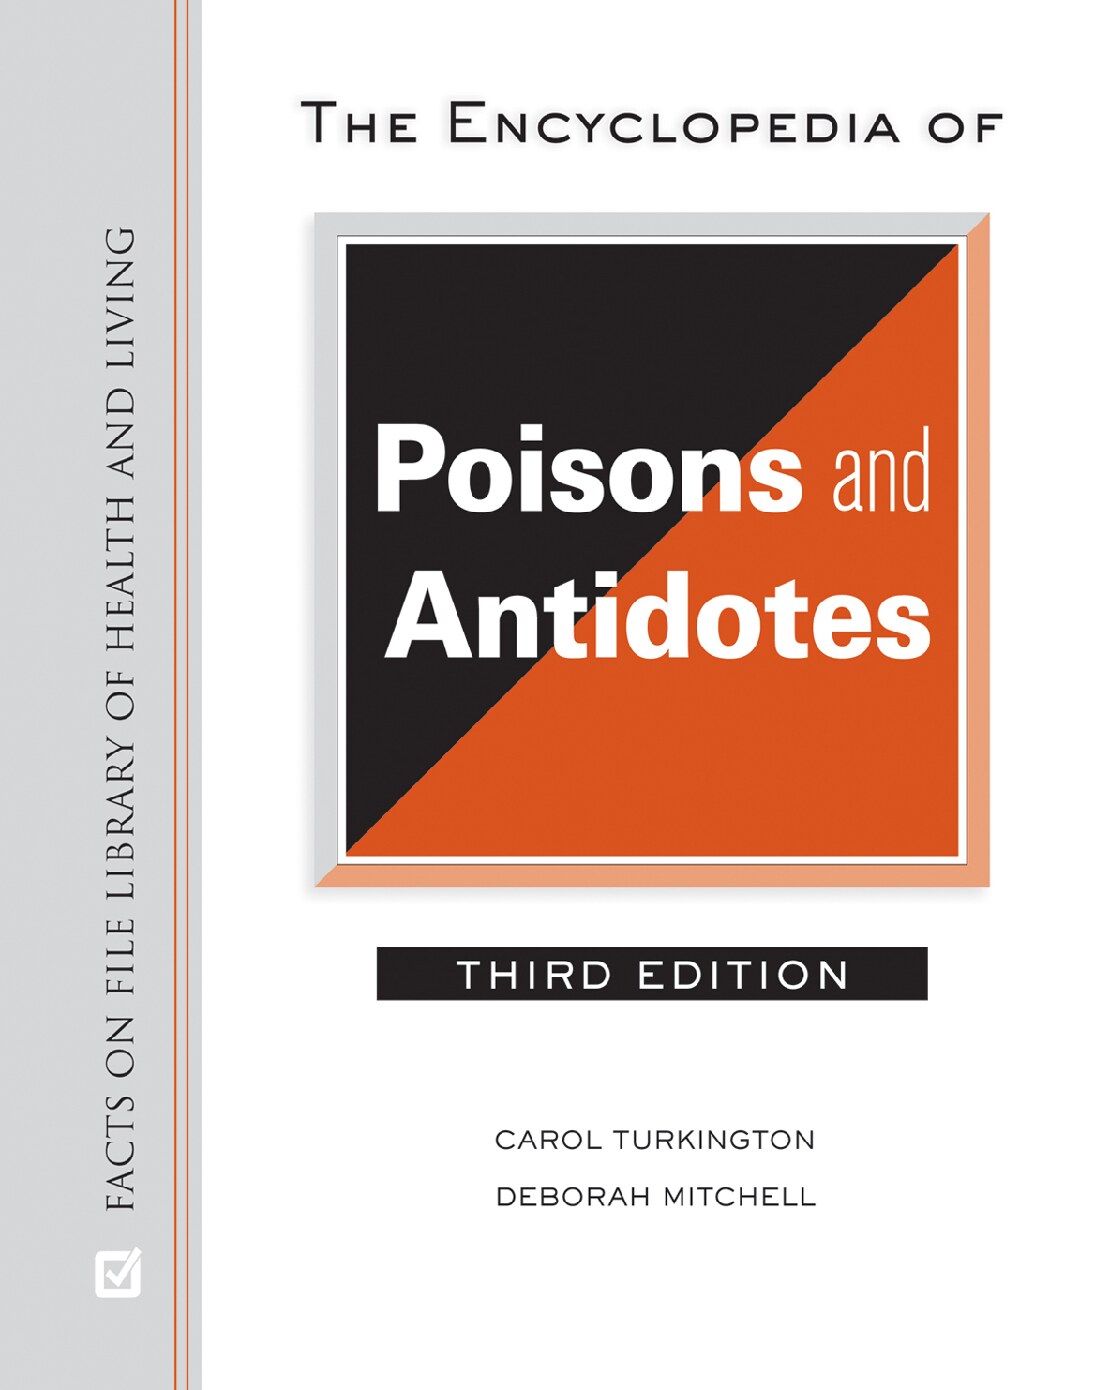 The Encyclopedia of Poisons and Antidotes